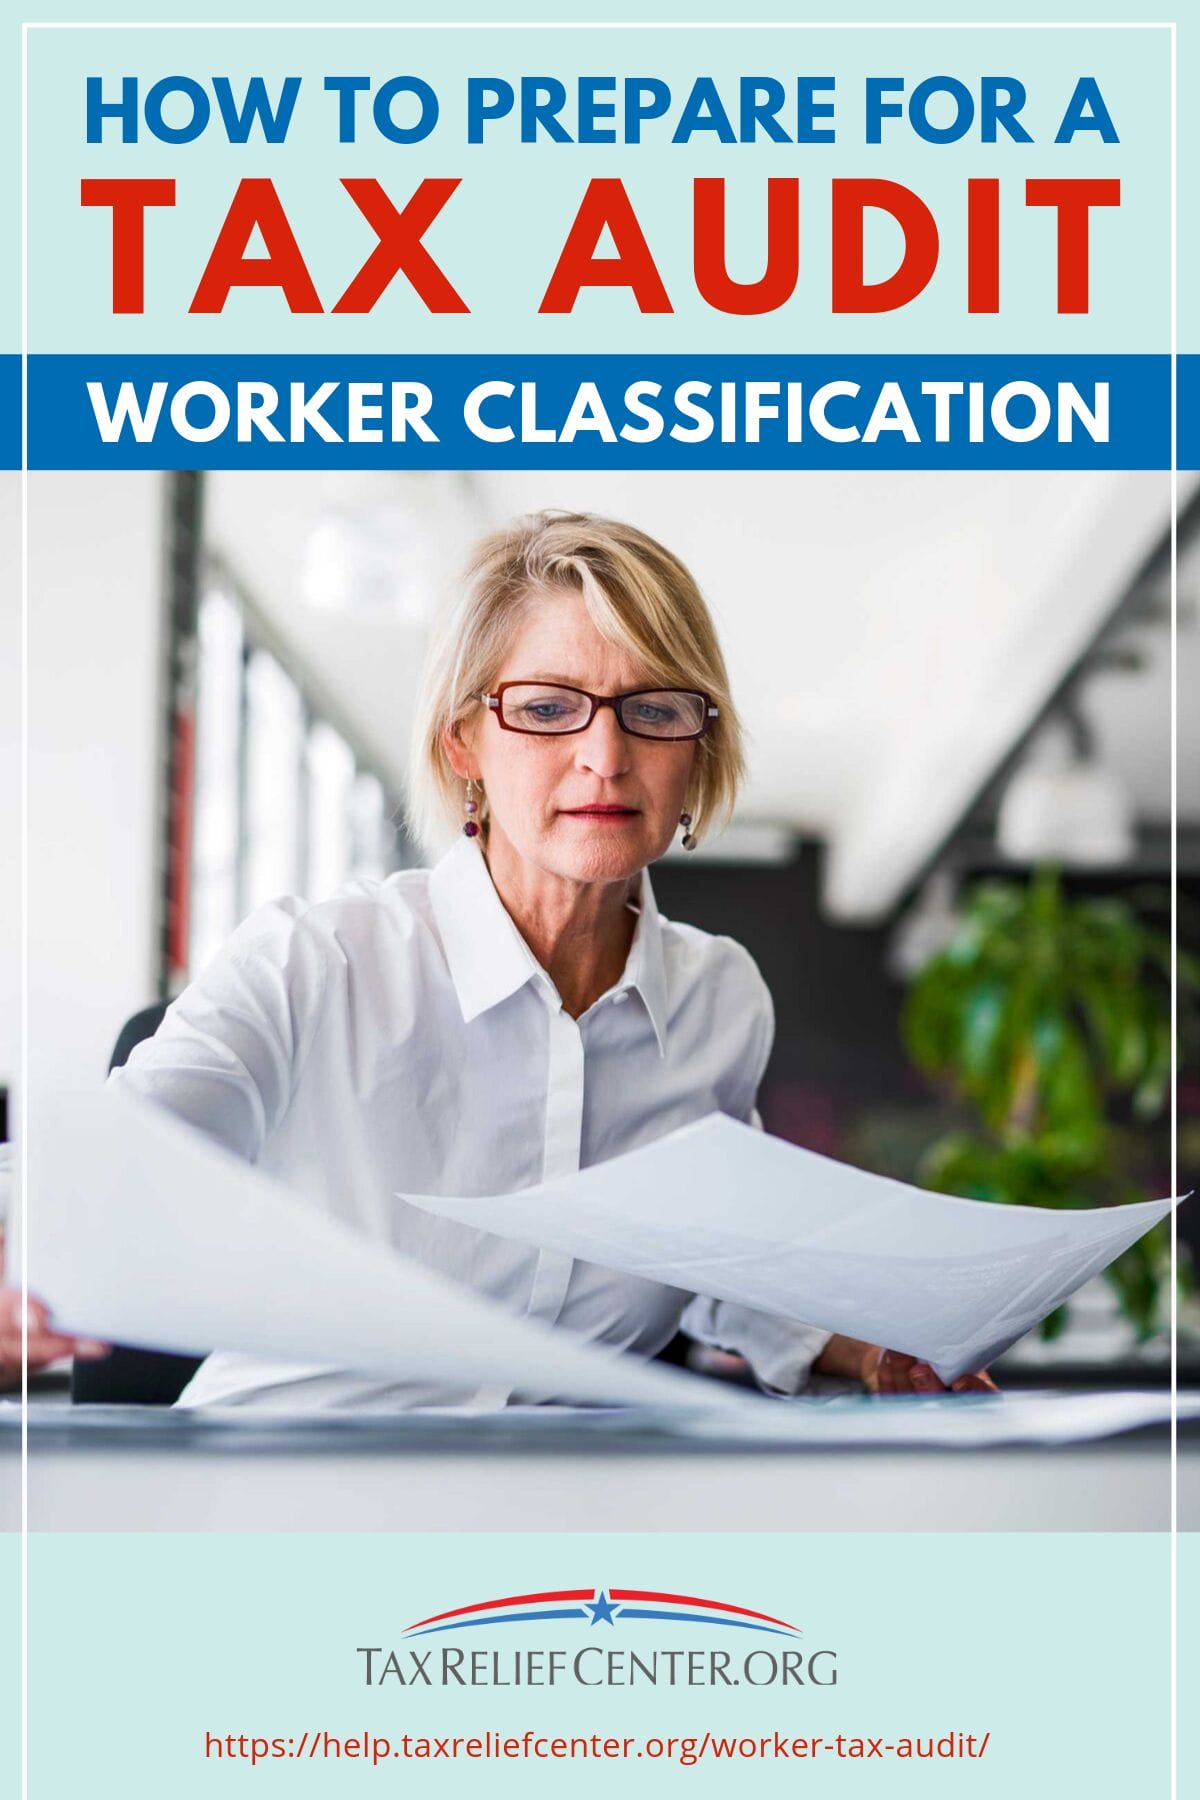 How To Prepare For A Tax Audit | Worker Classification https://help.taxreliefcenter.org/worker-tax-audit/